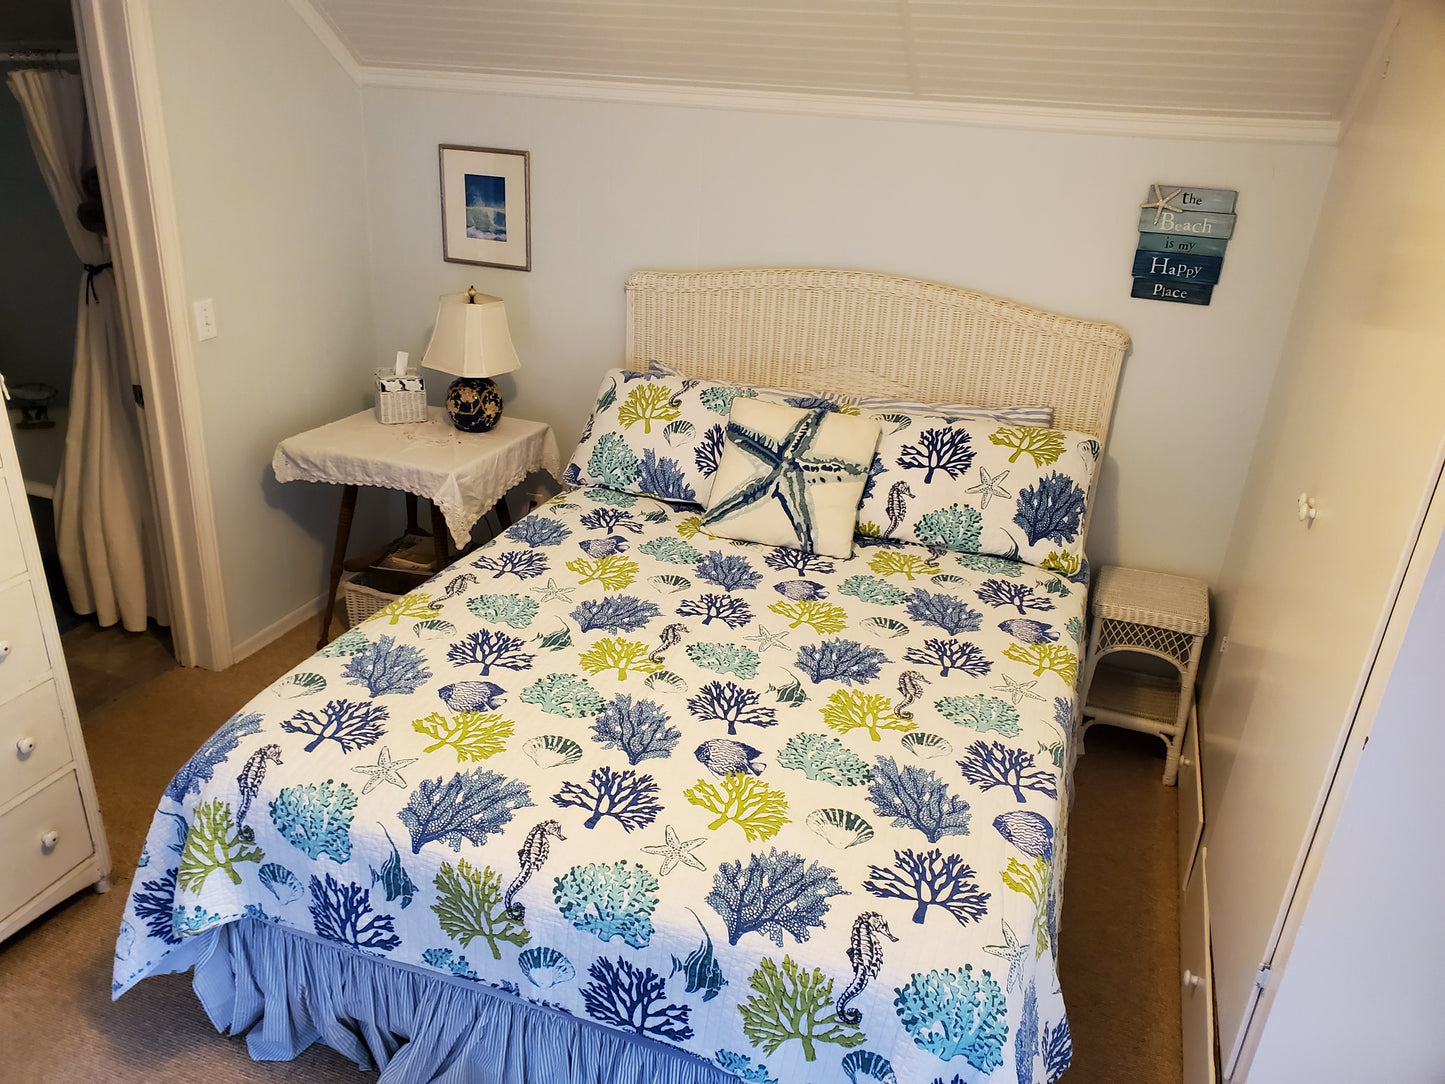 Bay Cottage Sleeps up to 5 in Port Townsend WA Vacation Rental